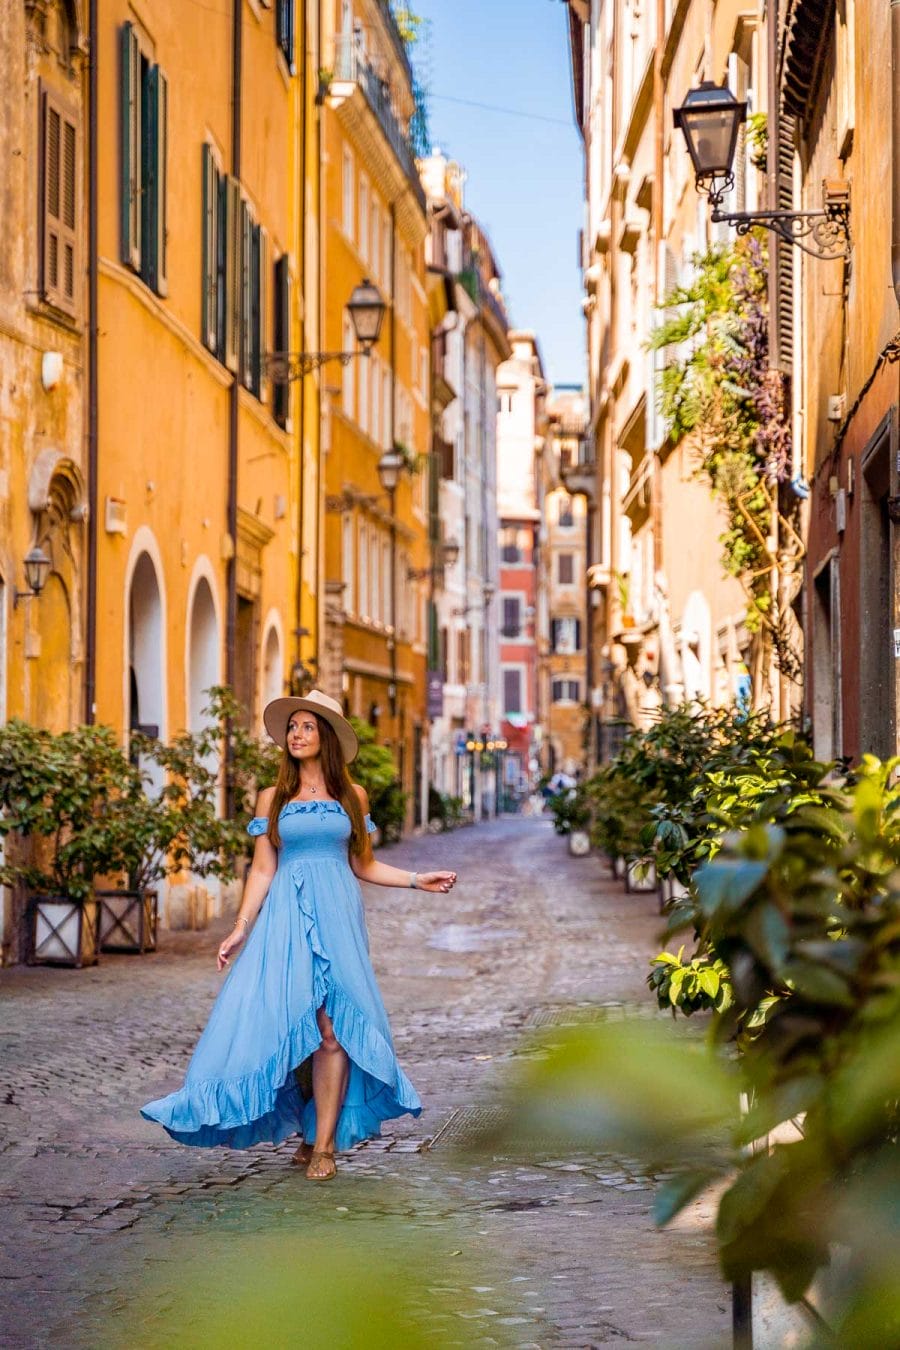 Girl in a blue dress in Via dei Coronari, one of the most instagrammable places in Rome